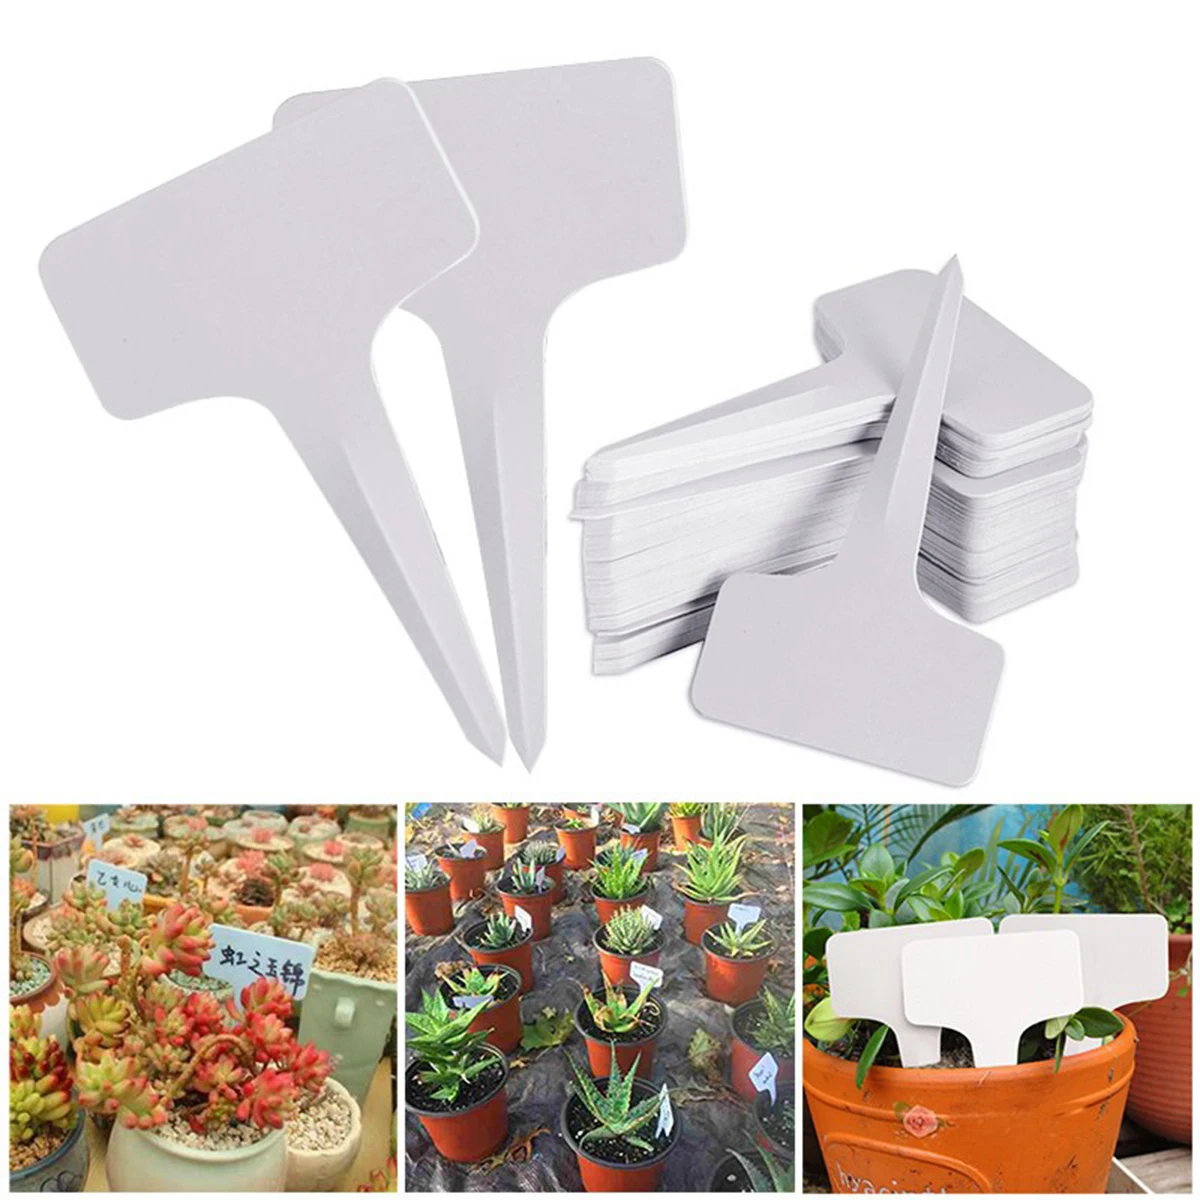 

100PCS T-Type Garden Labels Plant Classification Sorting Sign Tag Plastic Waterproof Mark Card Flower Seed Nursery Plant Labels